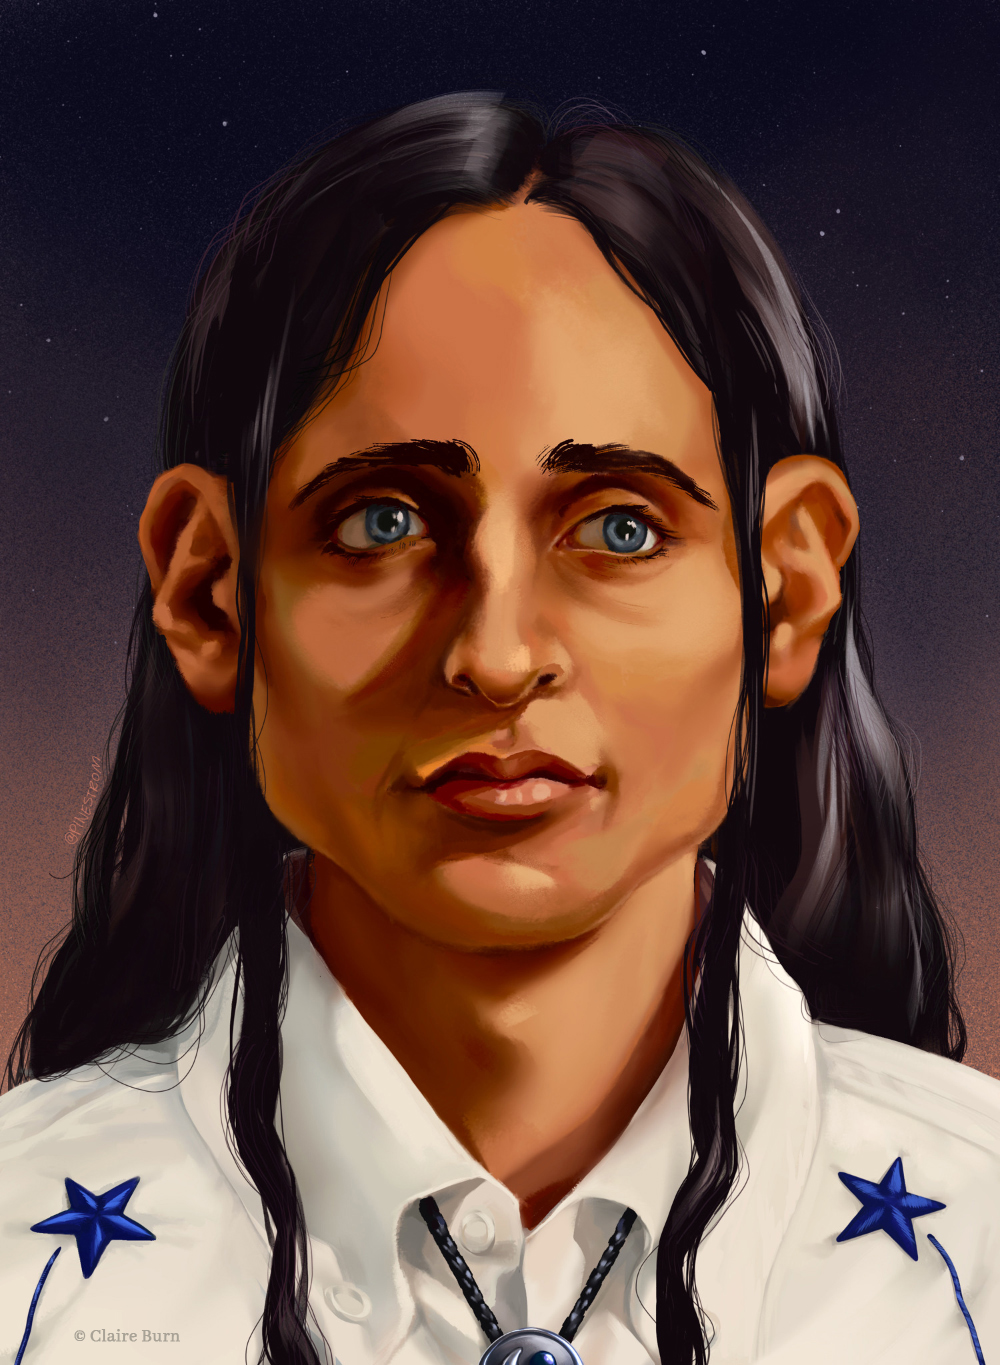 Digital bust portrait of a man with long dark hair and blue eyes, wearing a bolo tie and white shirt with embroidered blue stars.